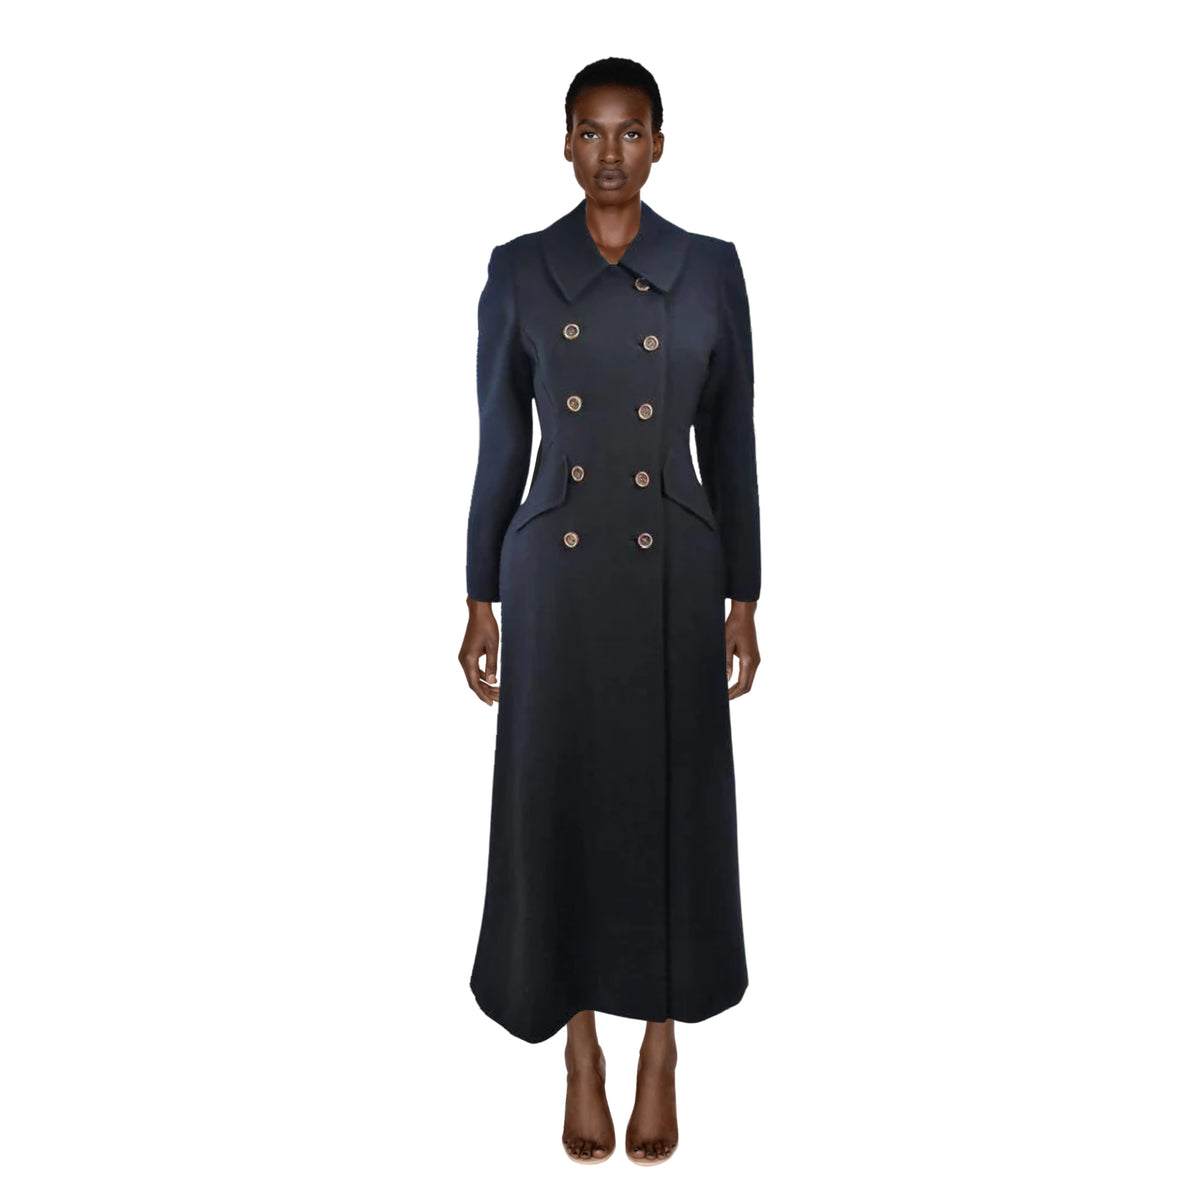 ALTON LEWIS Black Full Length Tailored Double Breasted Wool Coat | US 4-6